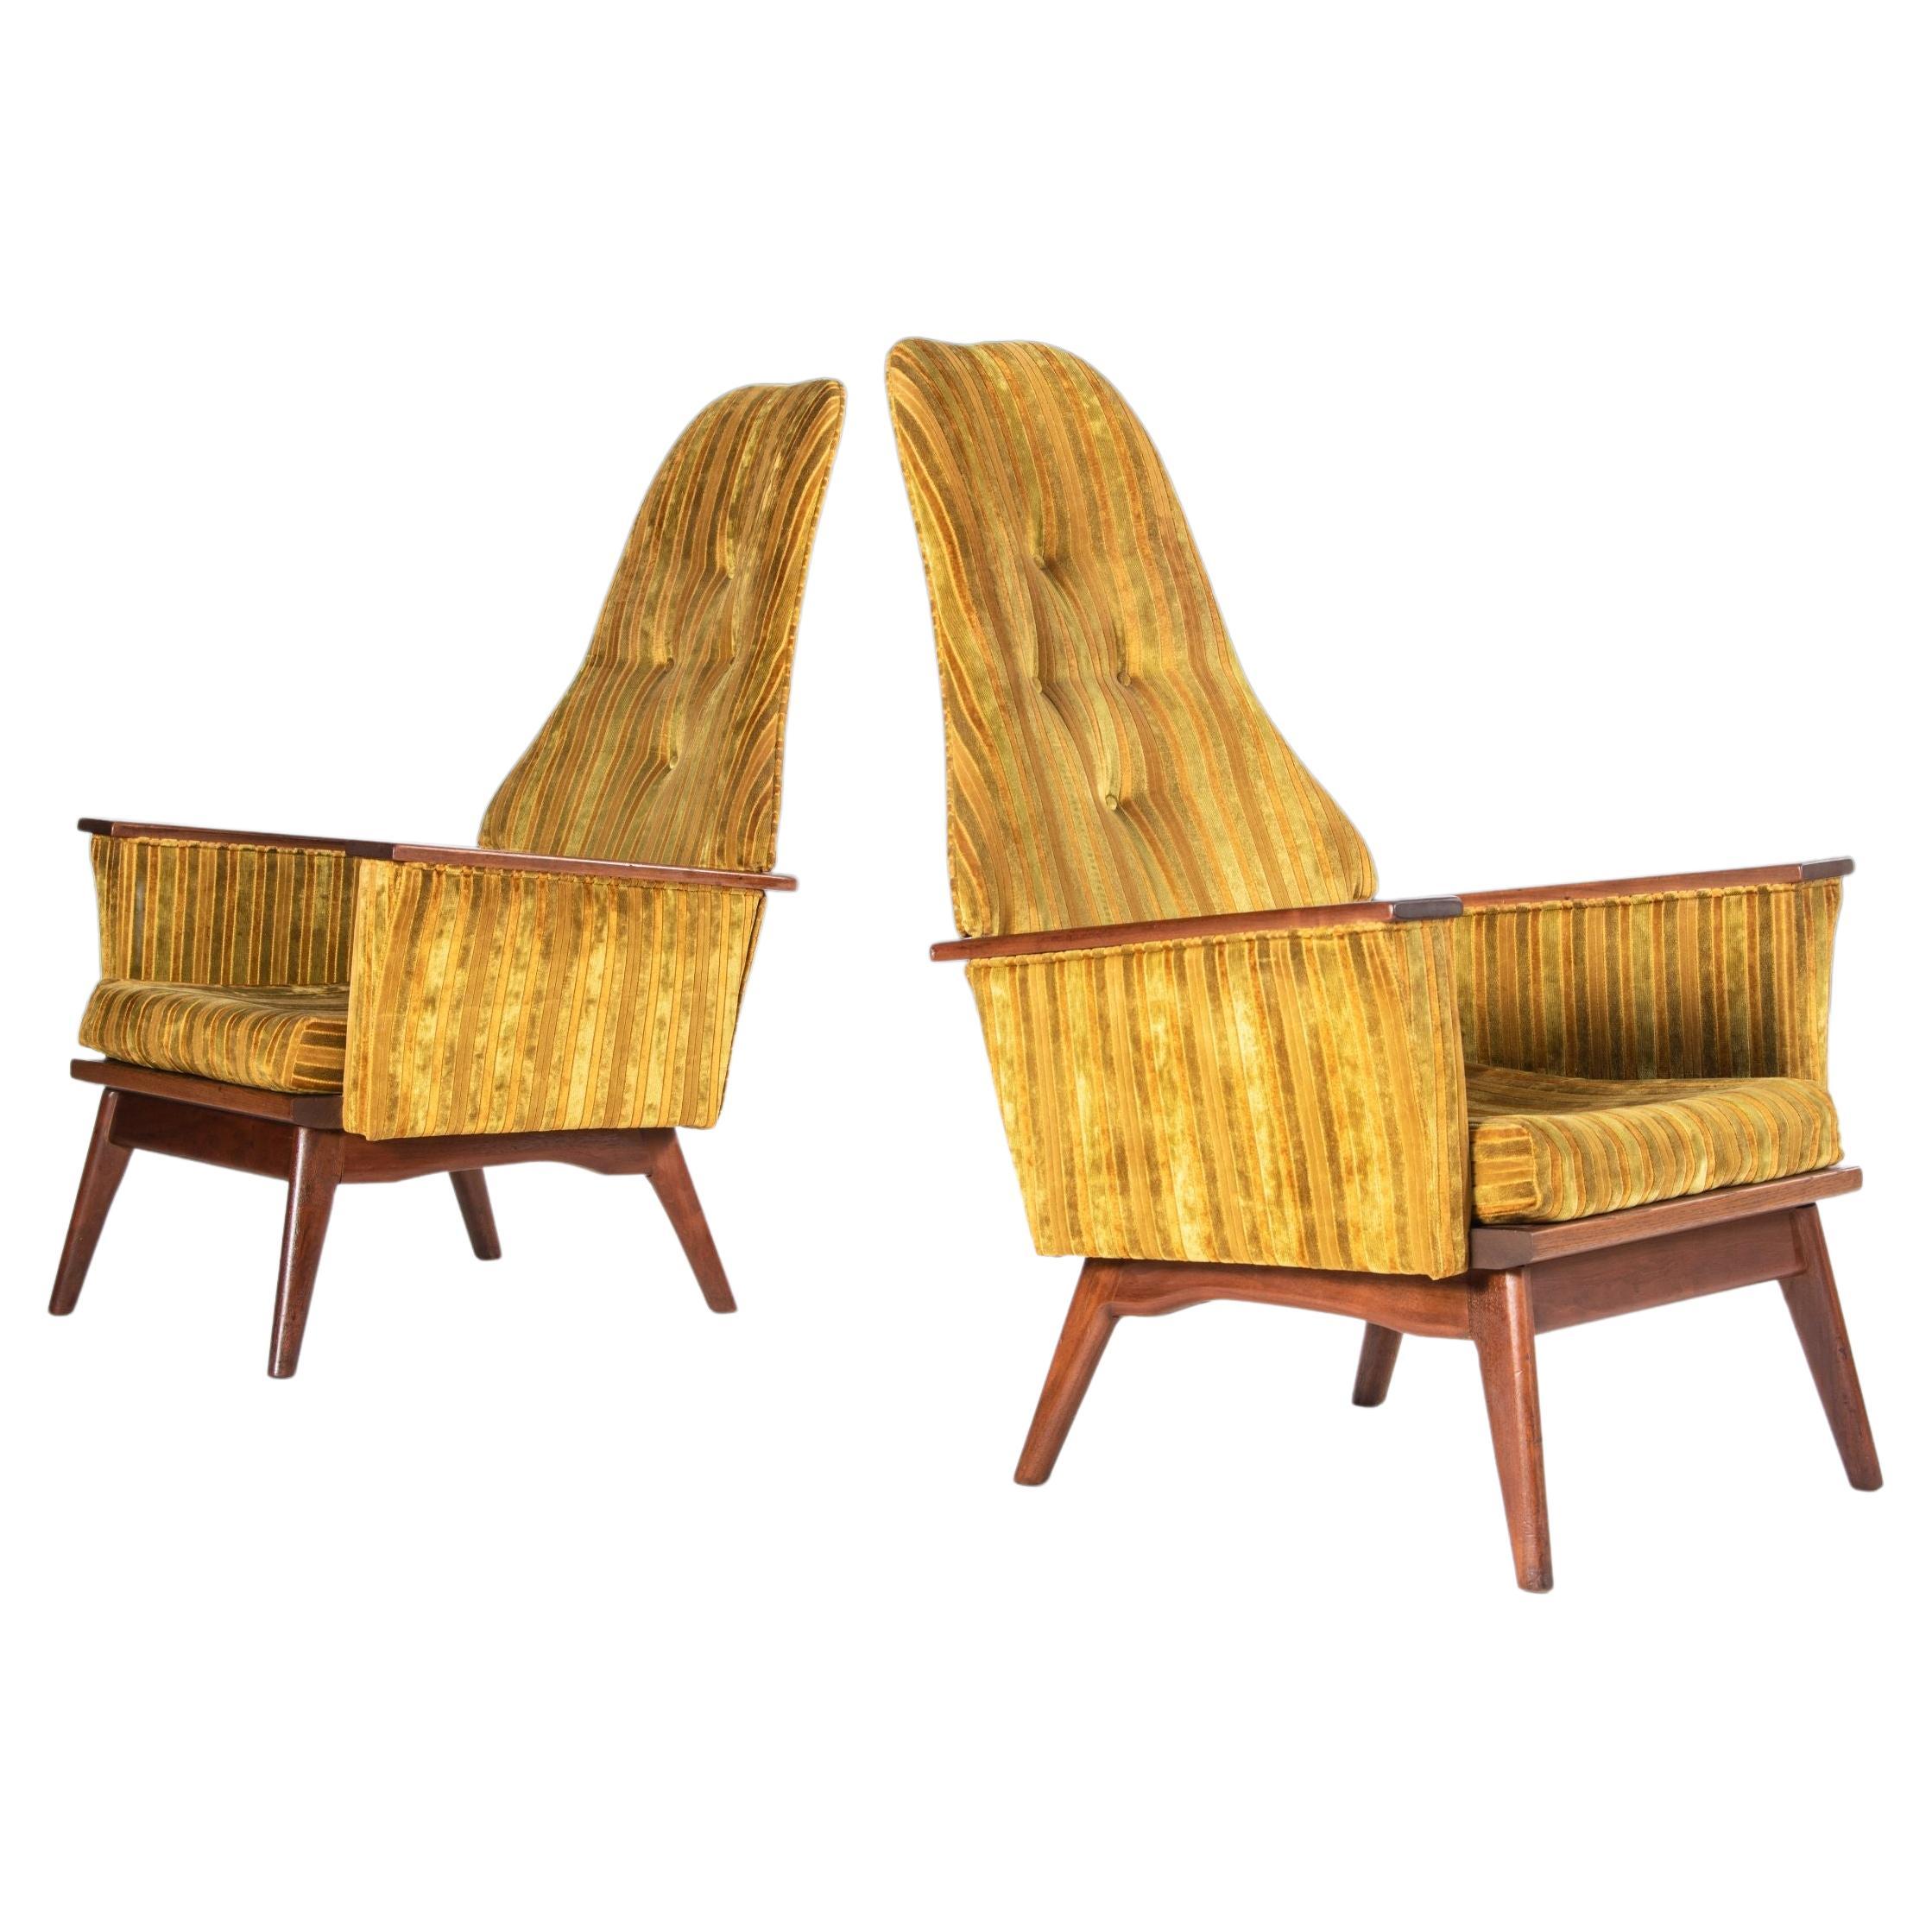 Set of Two (2) High Back "Slim Jim" Chairs After Adrian Pearsall by Krohler 1960